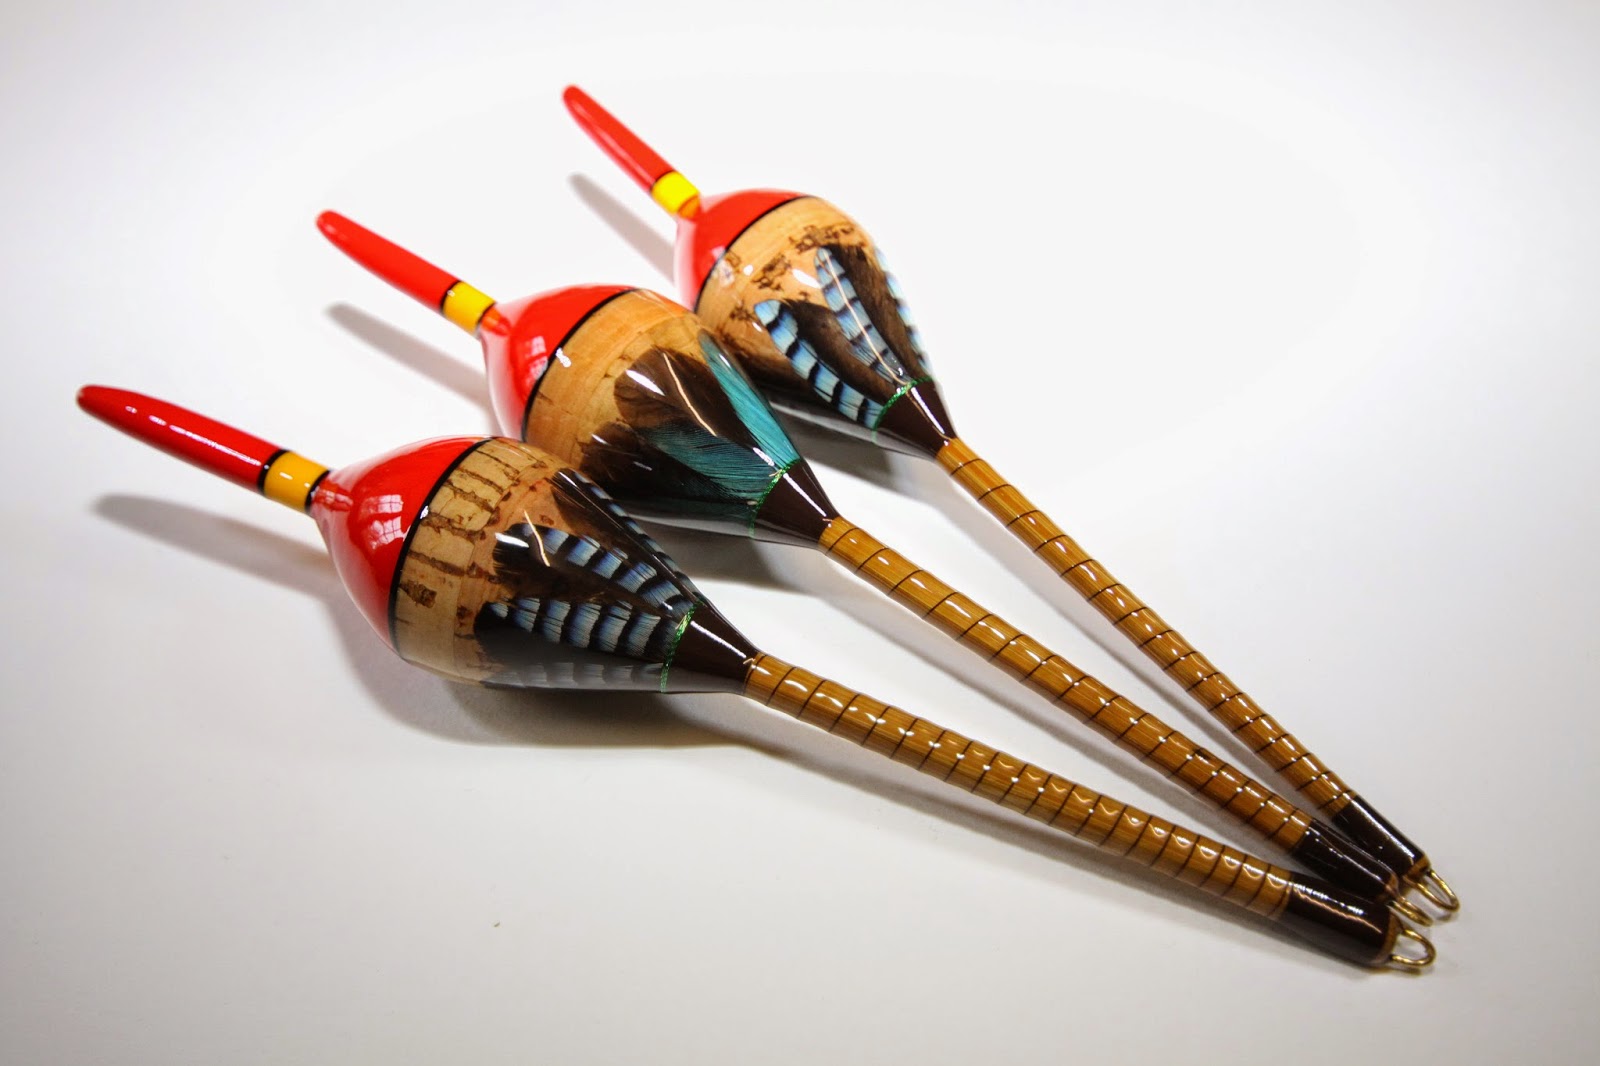 Traditional Handmade Fishing Tackle By Andrew Field: Handmade